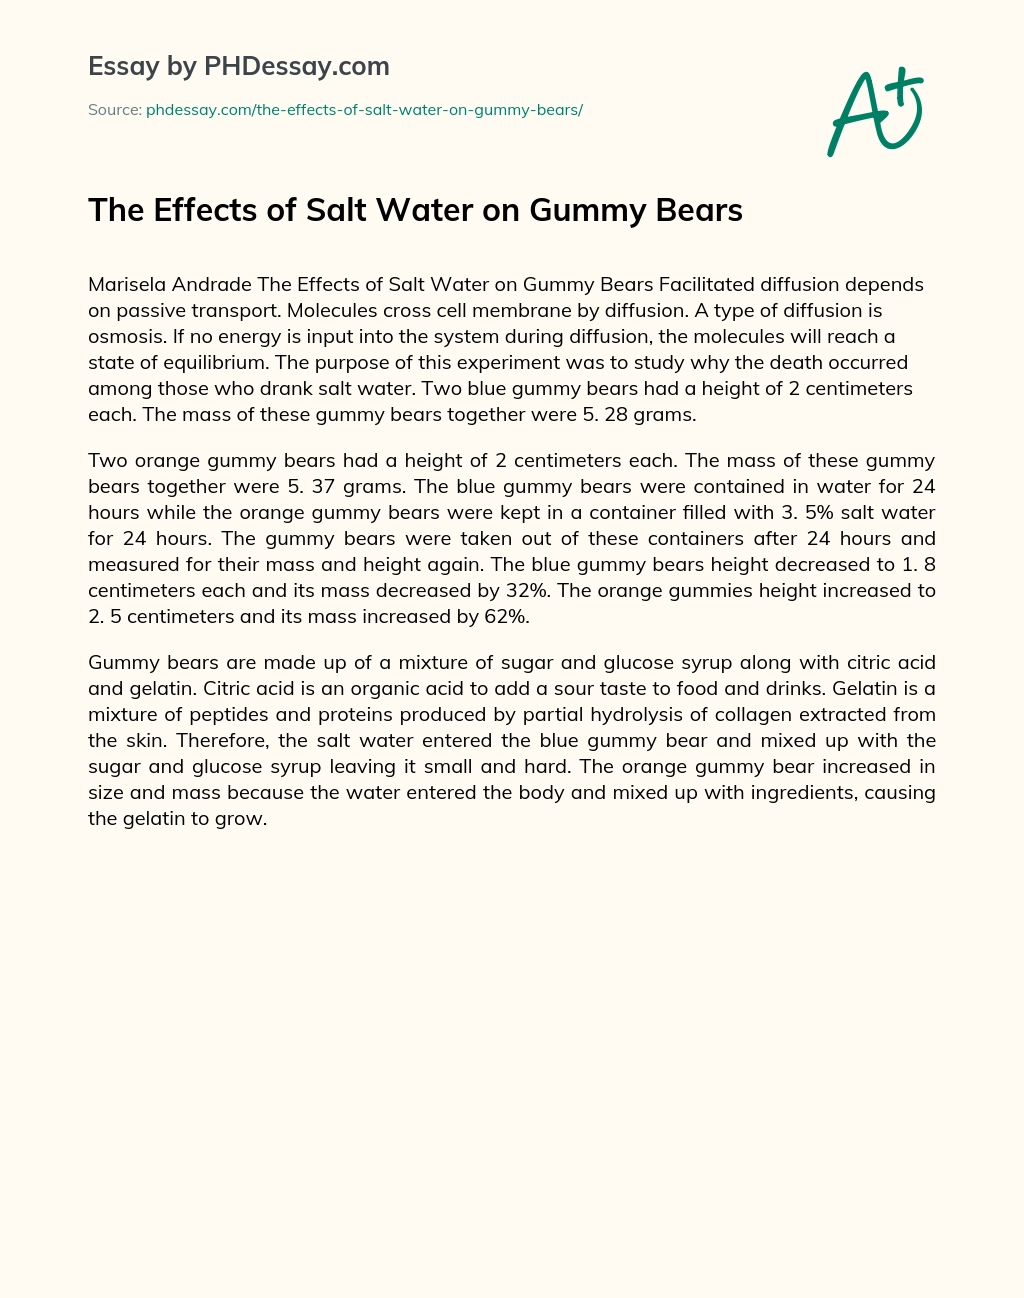 The Effects of Salt Water on Gummy Bears essay